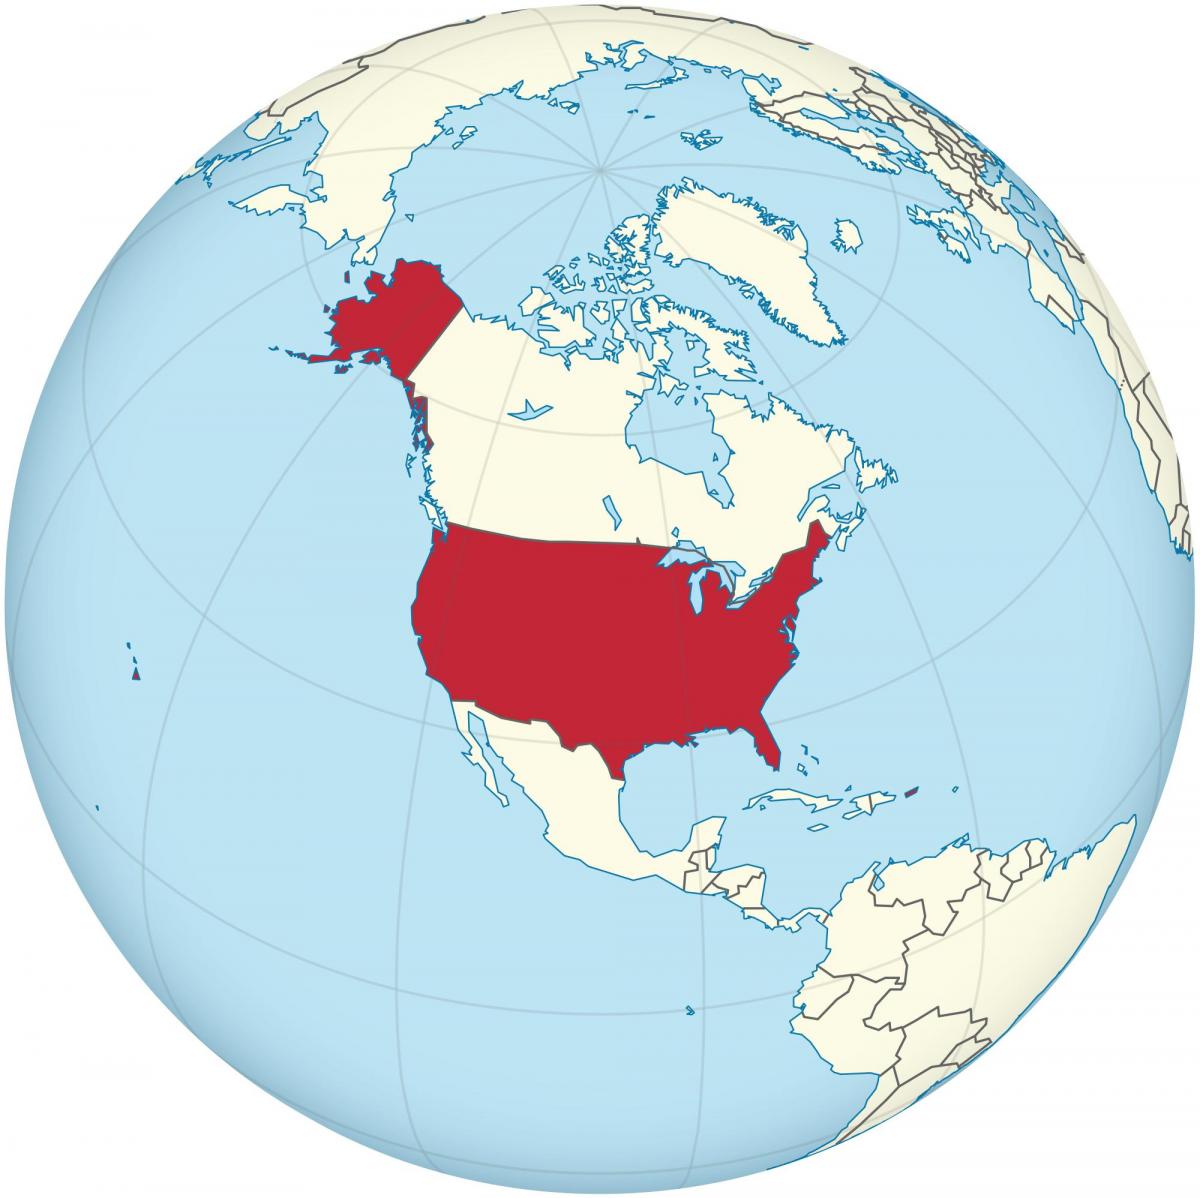 USA location on the Americas map